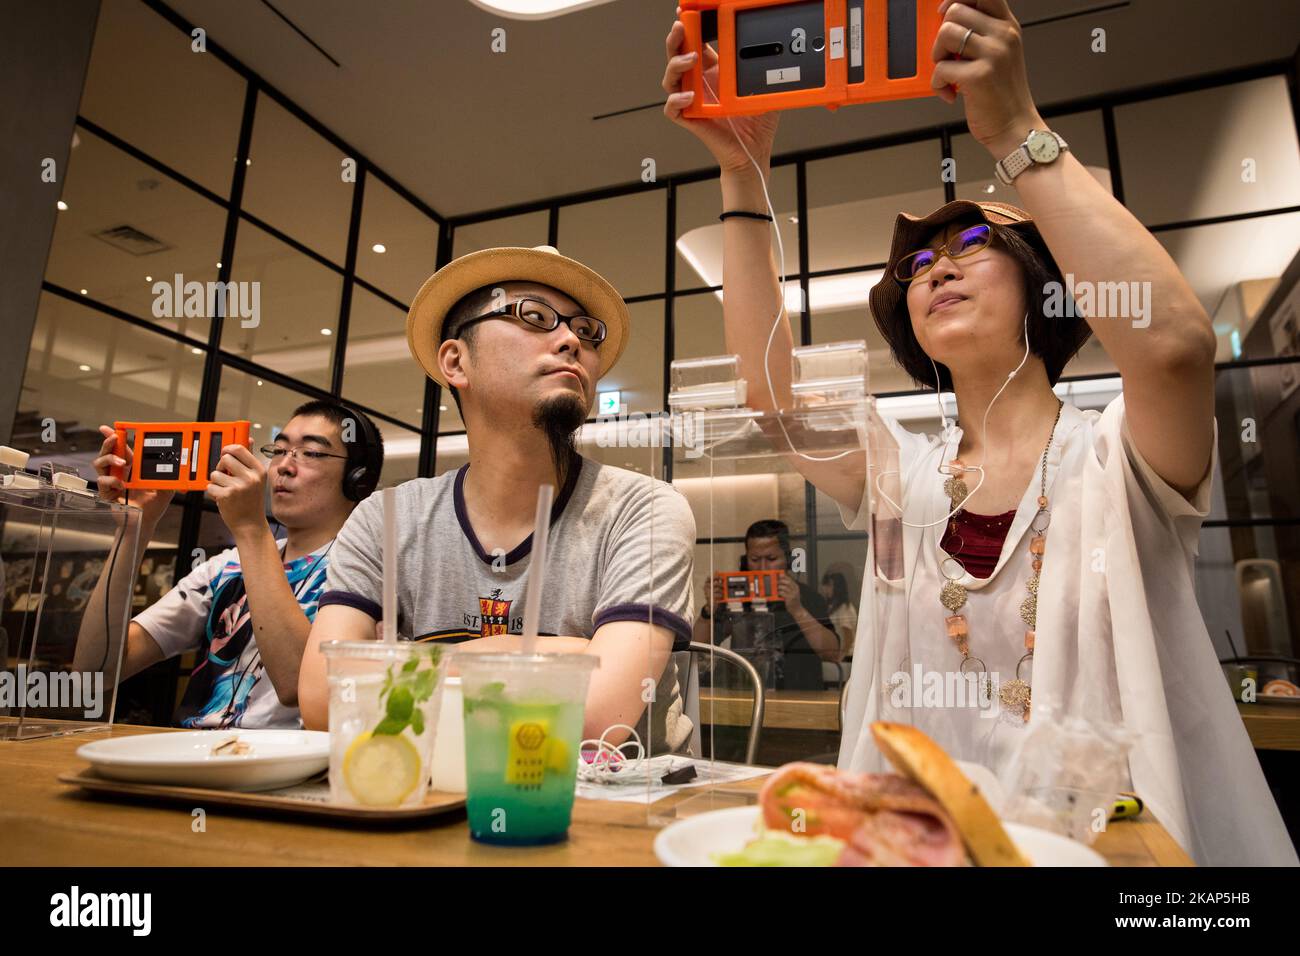 SENDAI, JAPAN - JULY 8: Anime fans holding a smart phone equipped with augmented reality (AR) application enjoying their virtual idol Hatsune Miku while having some sweets during an event in Sendai, Japan on July 8, 2017. As part of a promotion with telecommunications provider au/KDDI, Crypton Future Media and Blue Leaf Cafe operator, guest can enjoy dining with a special menu with their Vocaloid superstarIdol Hatsune Miku several days. (Photo by Richard Atrero de Guzman/NUR Photo) (Photo by Richard Atrero de Guzman/NurPhoto) *** Please Use Credit from Credit Field *** Stock Photo